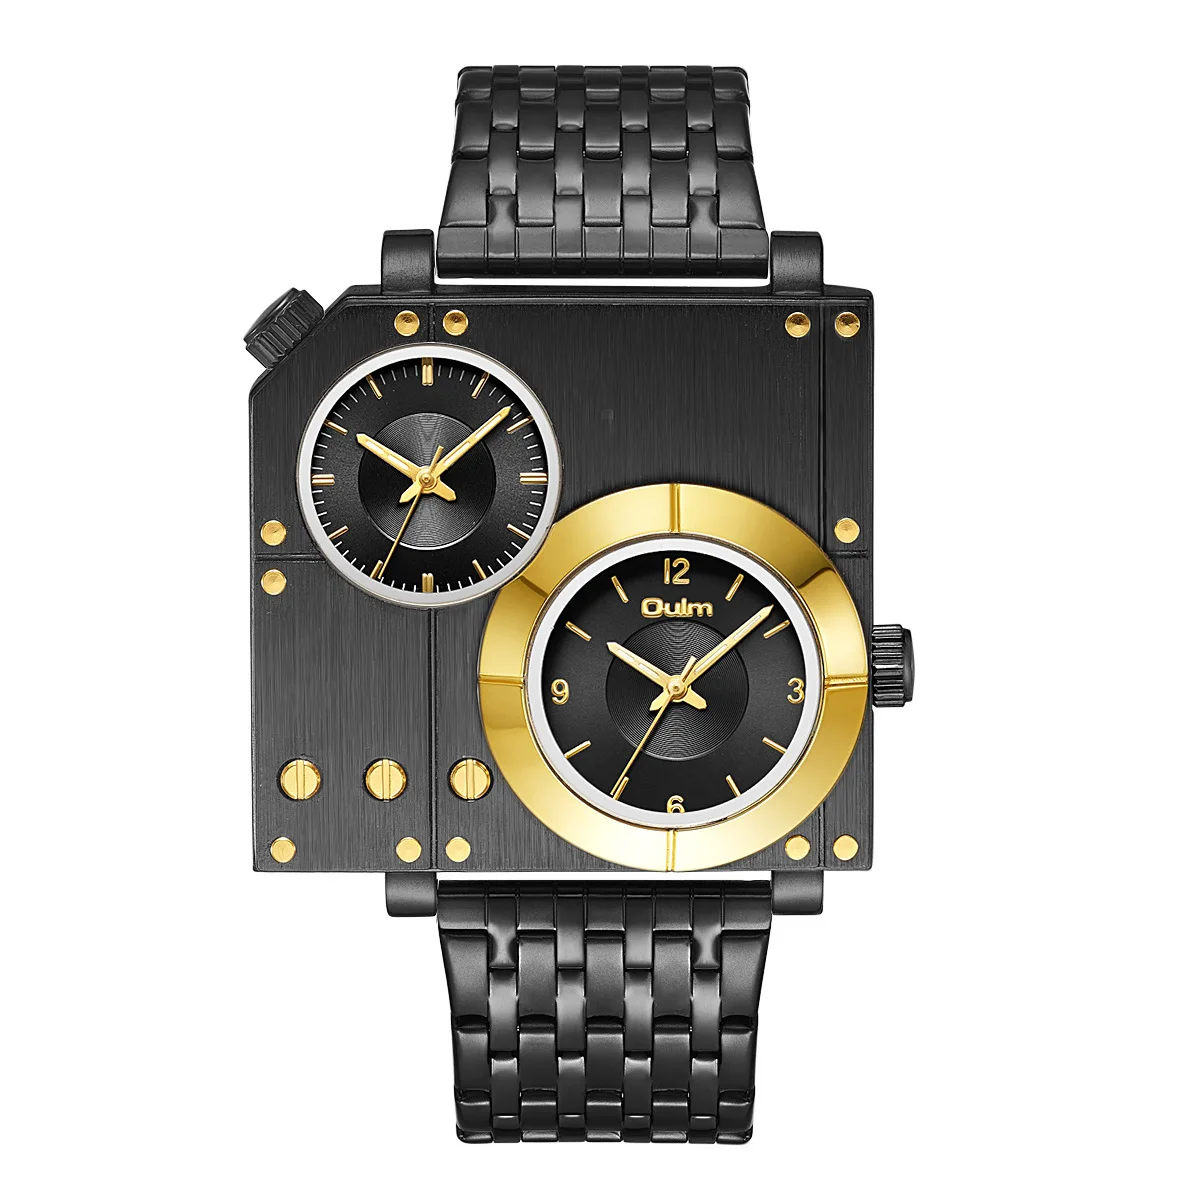 

2022 Oulm Square Casual Large Dial Men's Business Watch Double Time Zone Steel Band Waterproof Quartz Watch Men's Gold Explosion